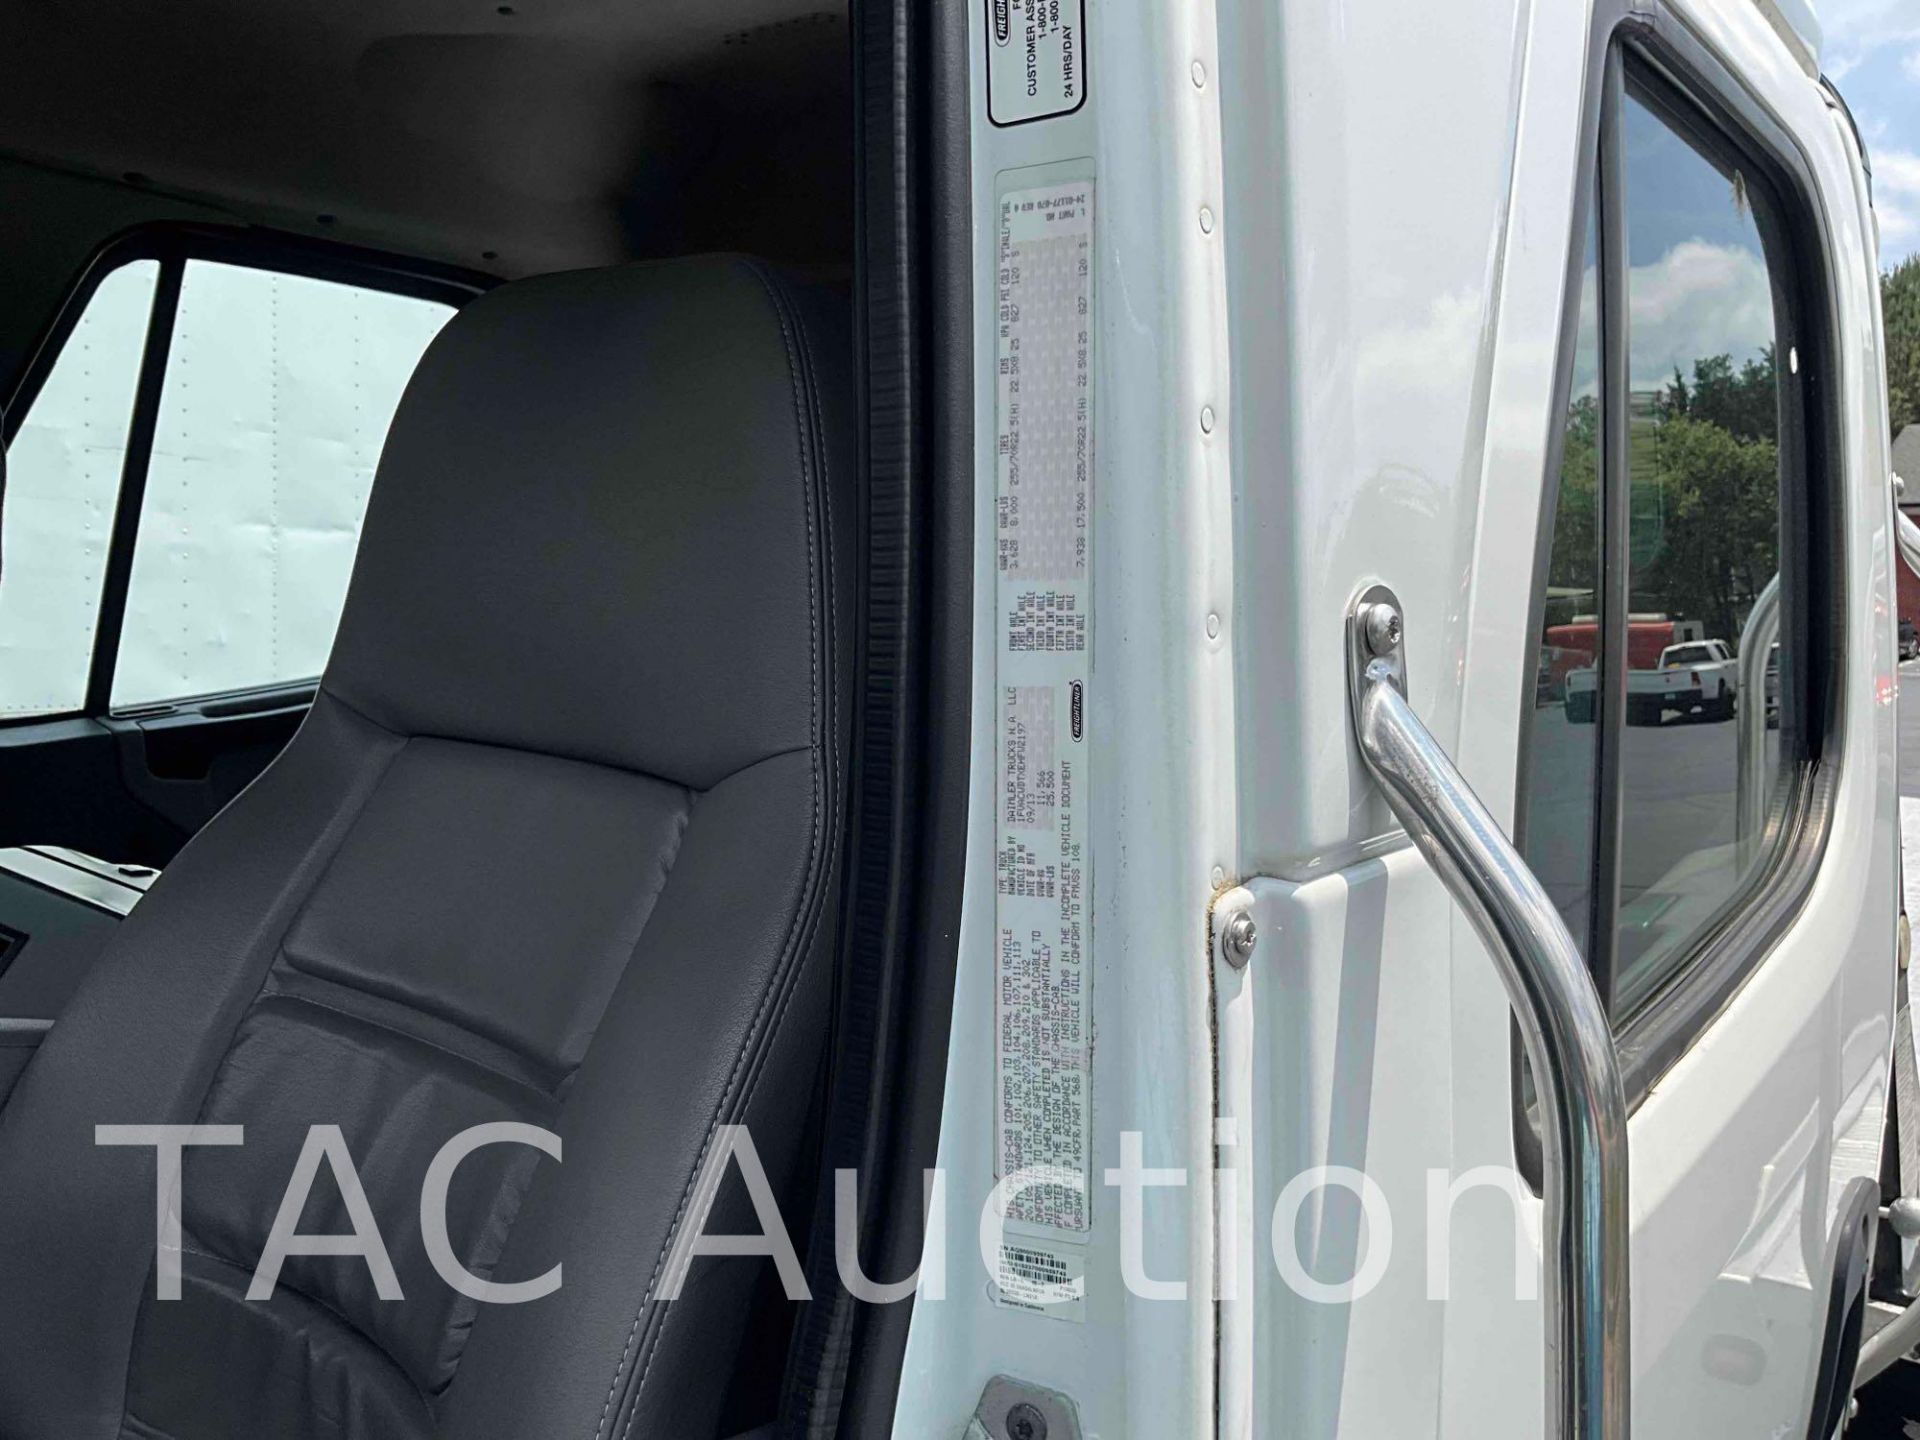 2014 Freightliner M2 Crew Cab Rollback Truck - Image 27 of 71